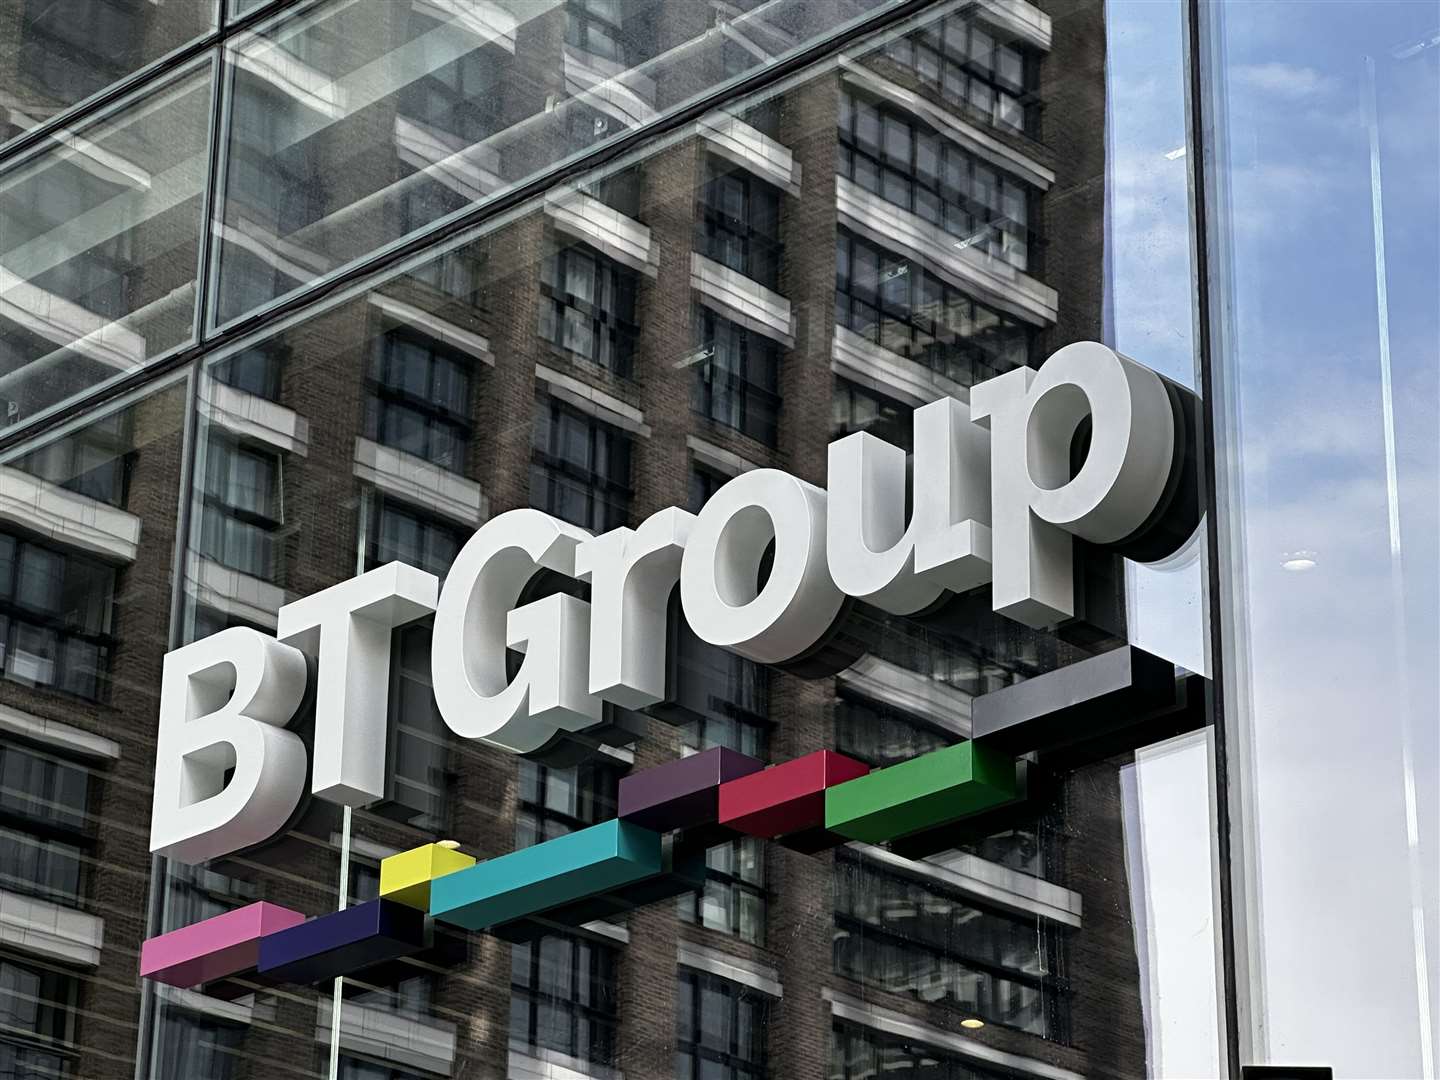 BT Group said it plans to cut between 40,000 and 55,000 jobs by the end of the decade (BT Group/PA)